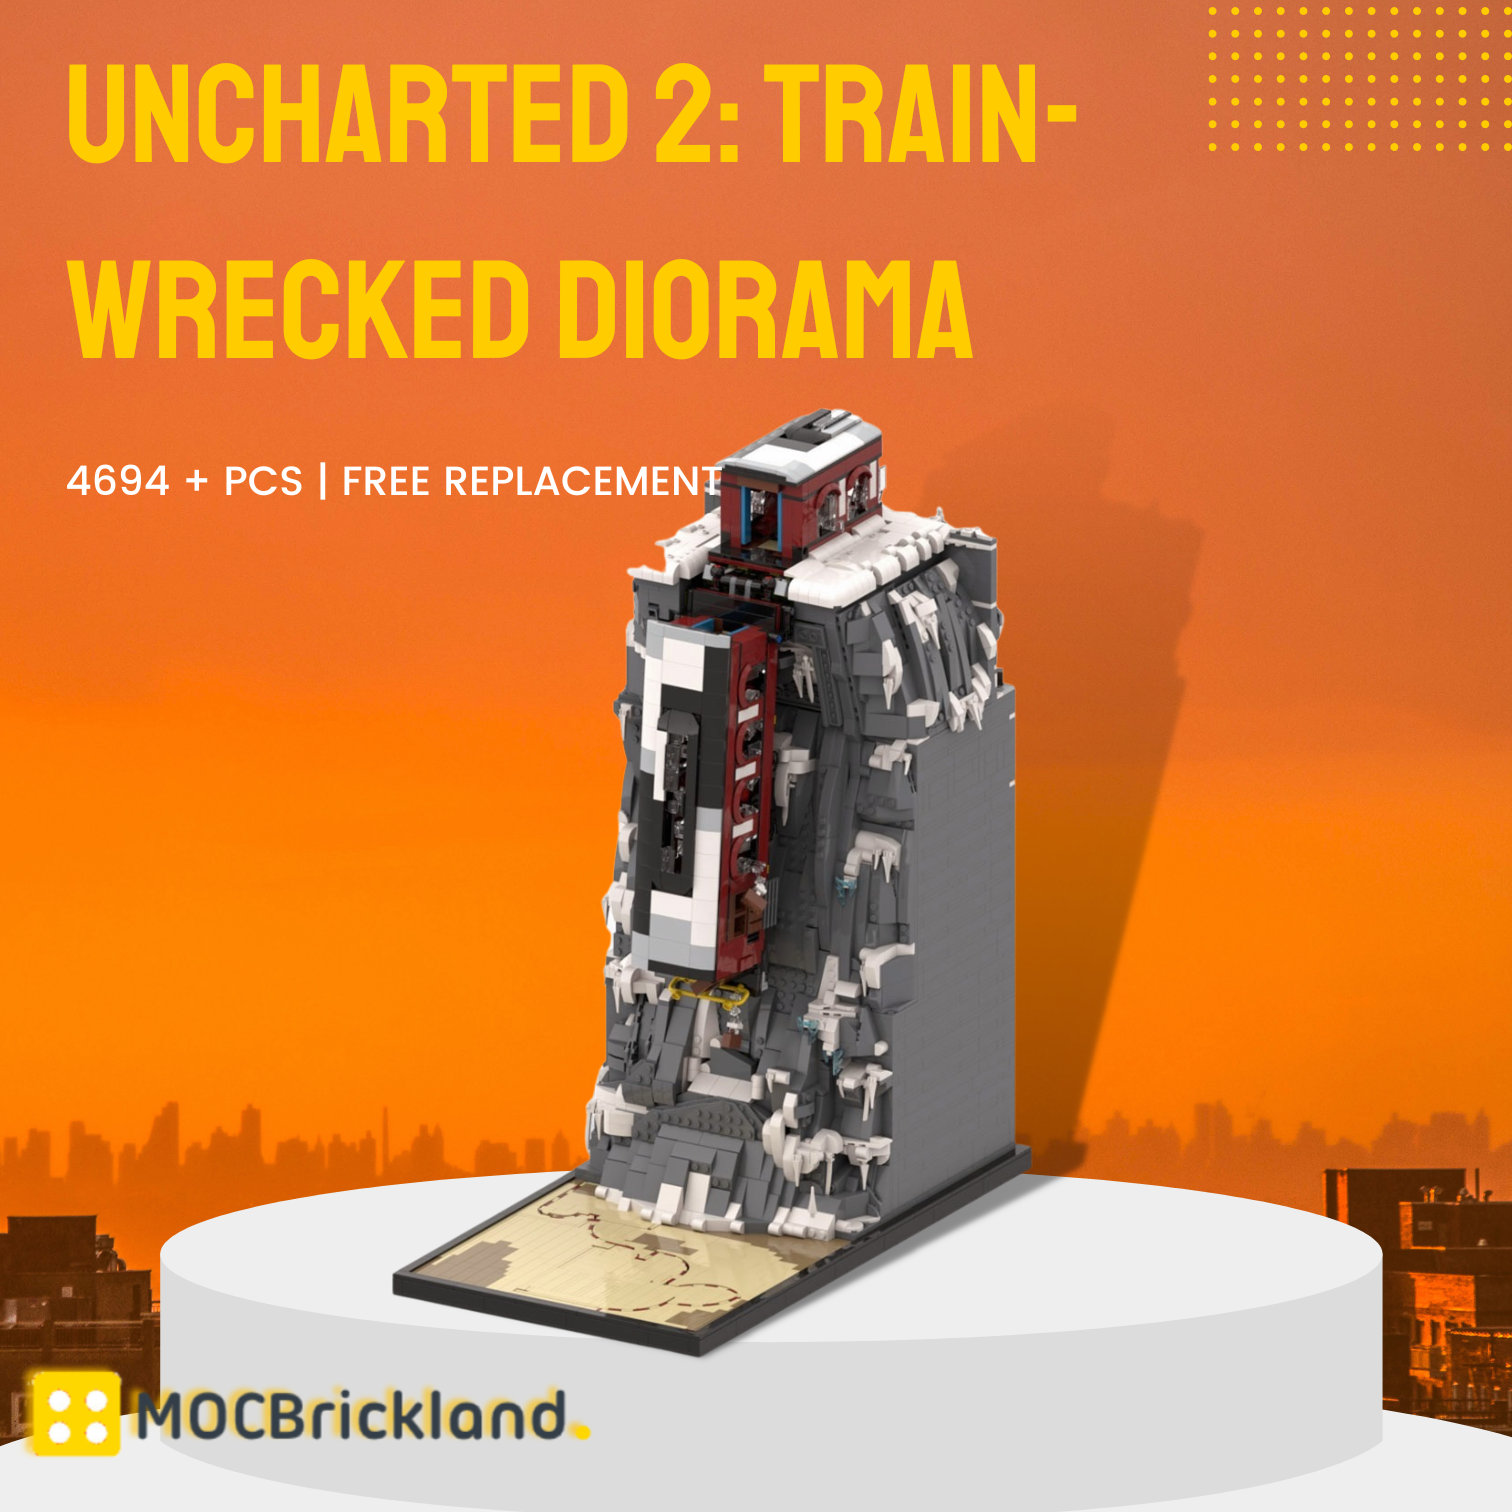 MOCBRICKLAND MOC-125839 Uncharted 2: Train-wrecked Diorama